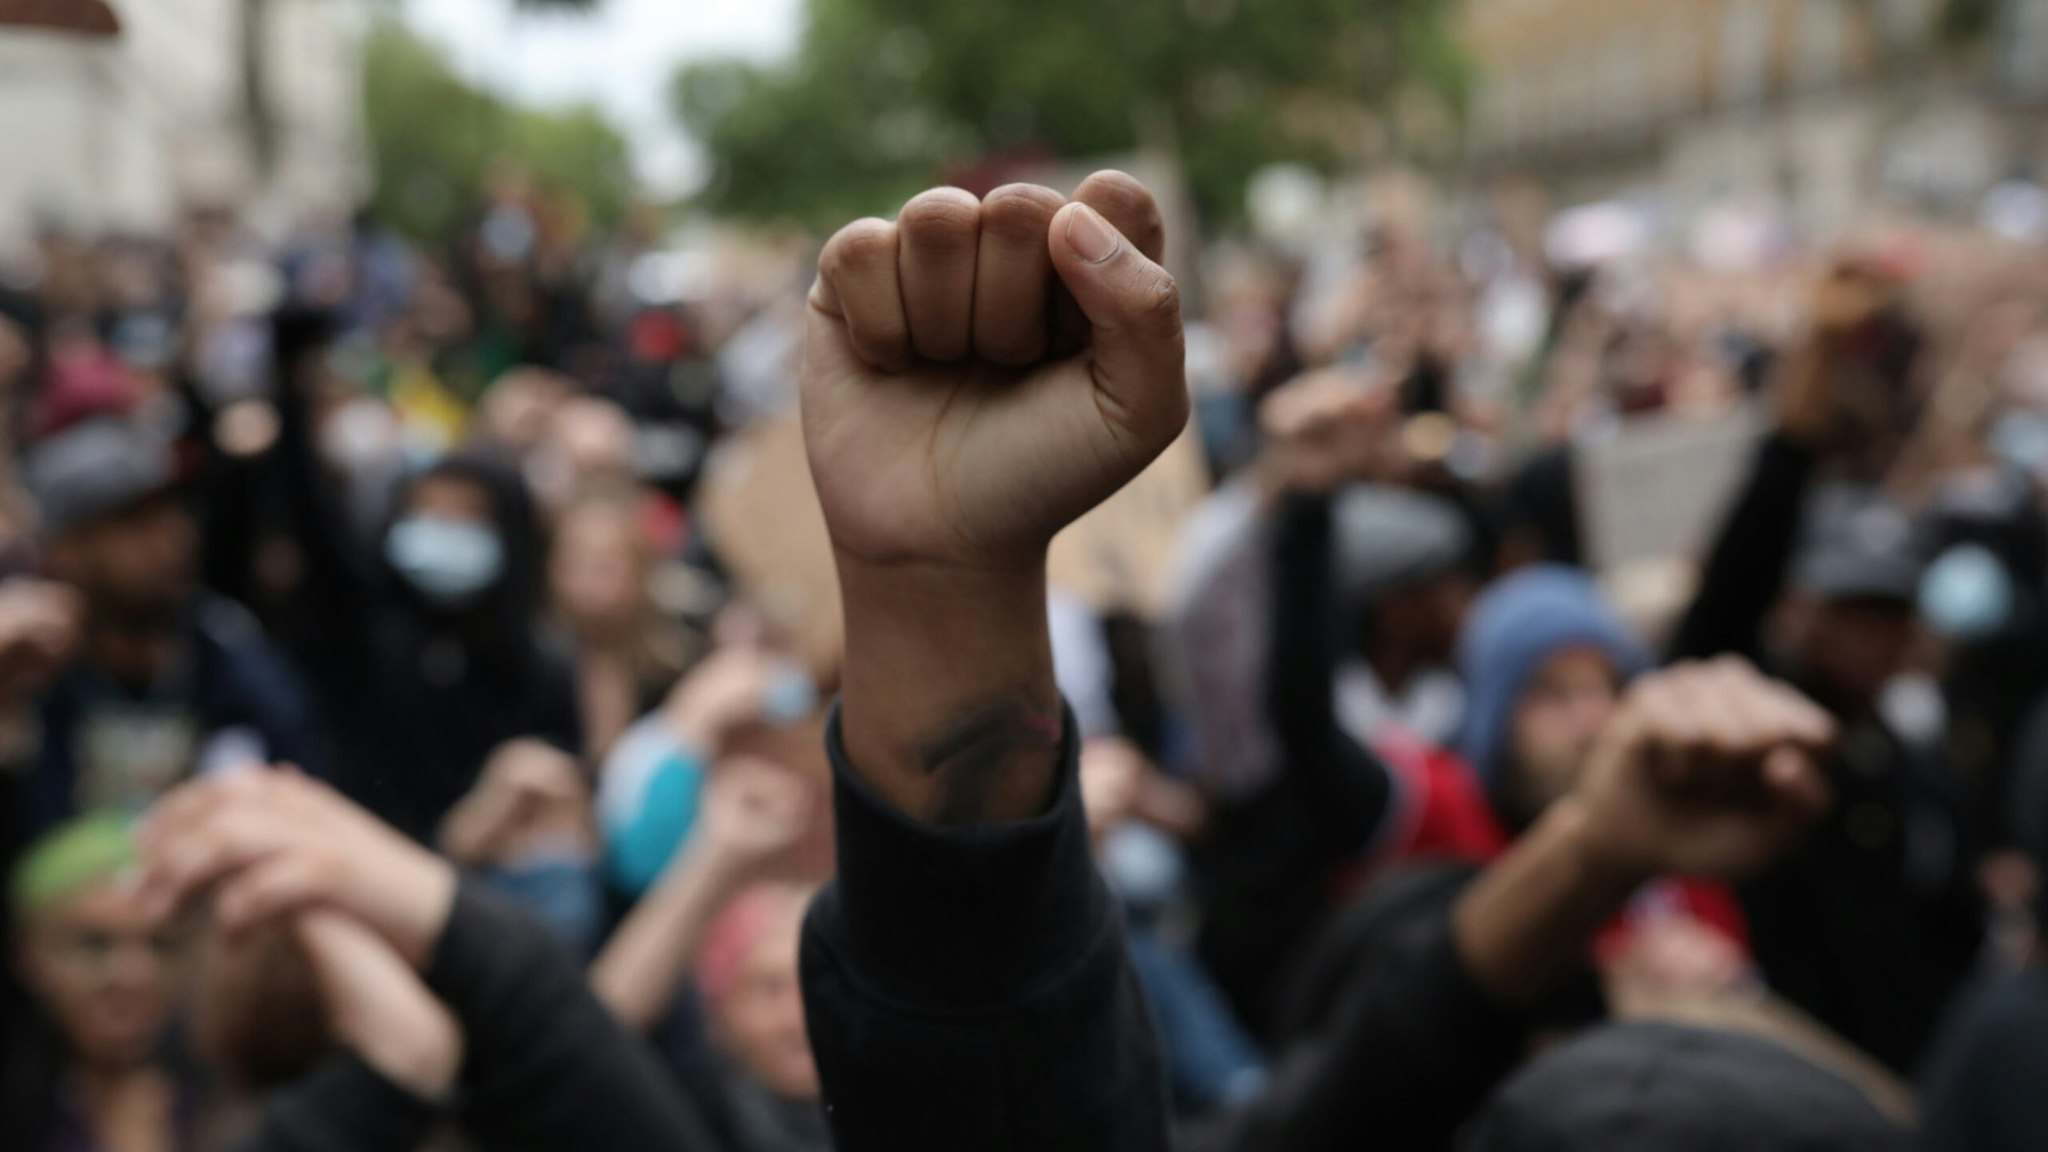 Protesters raise clenched fists during a Black Lives Matter protest outside the Houses of Parliament on June 3, 2020 in London, United Kingdom.